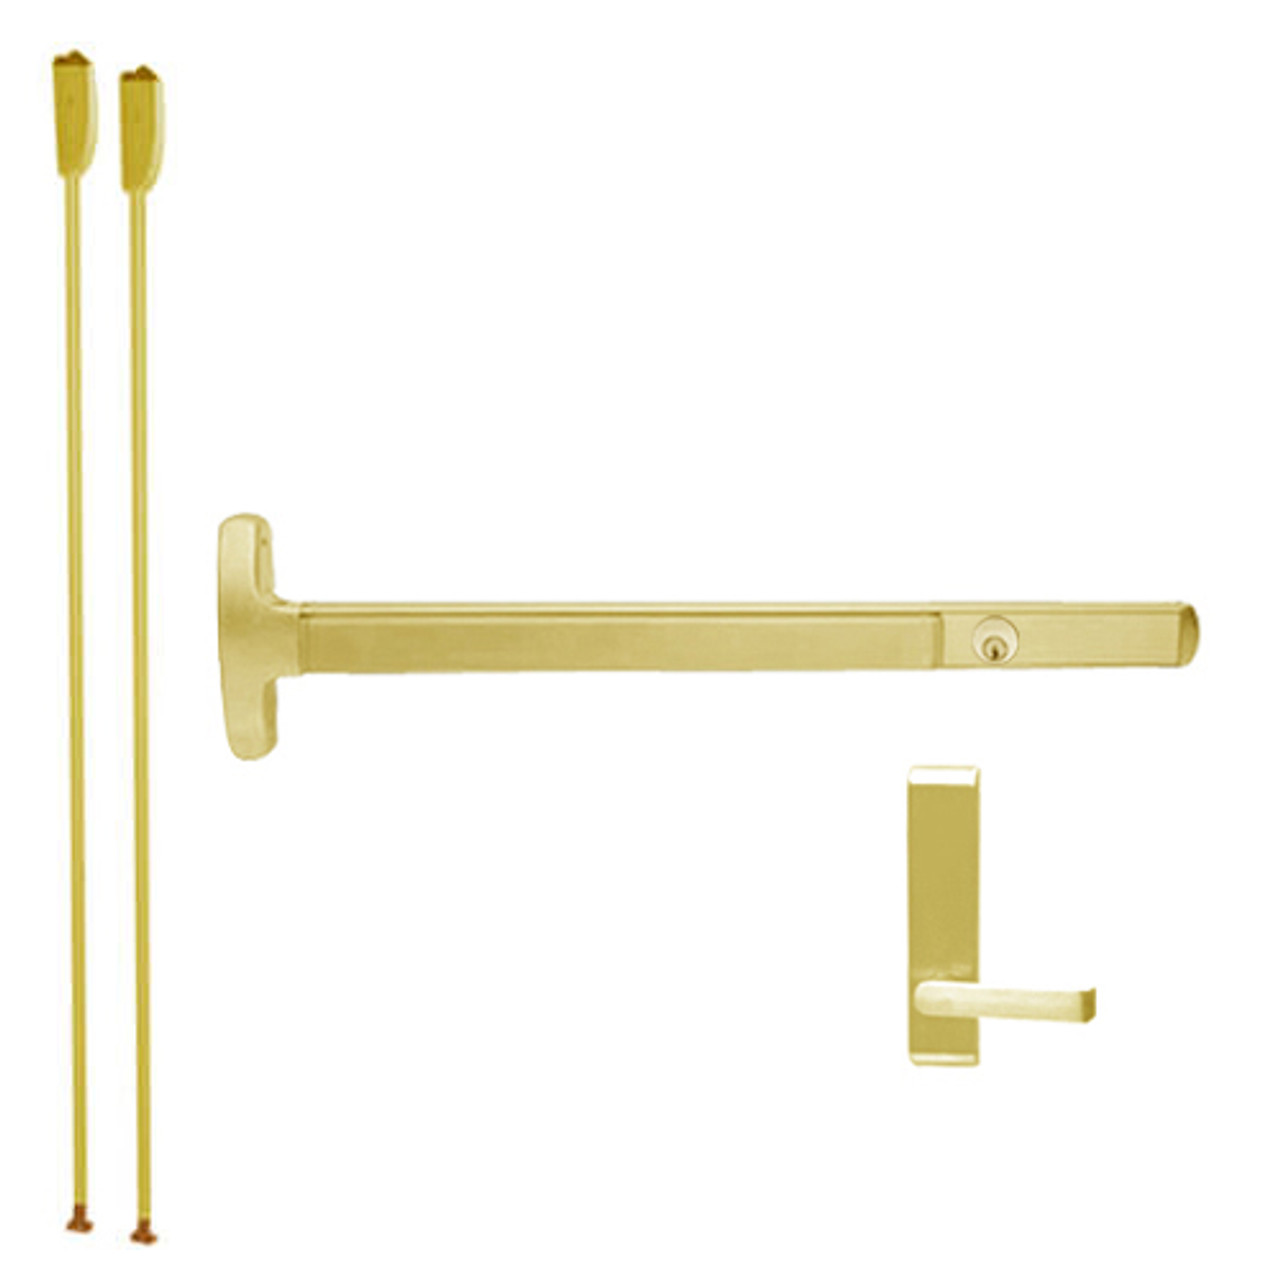 CD24-V-L-BE-Dane-US3-2-RHR Falcon Exit Device in Polished Brass